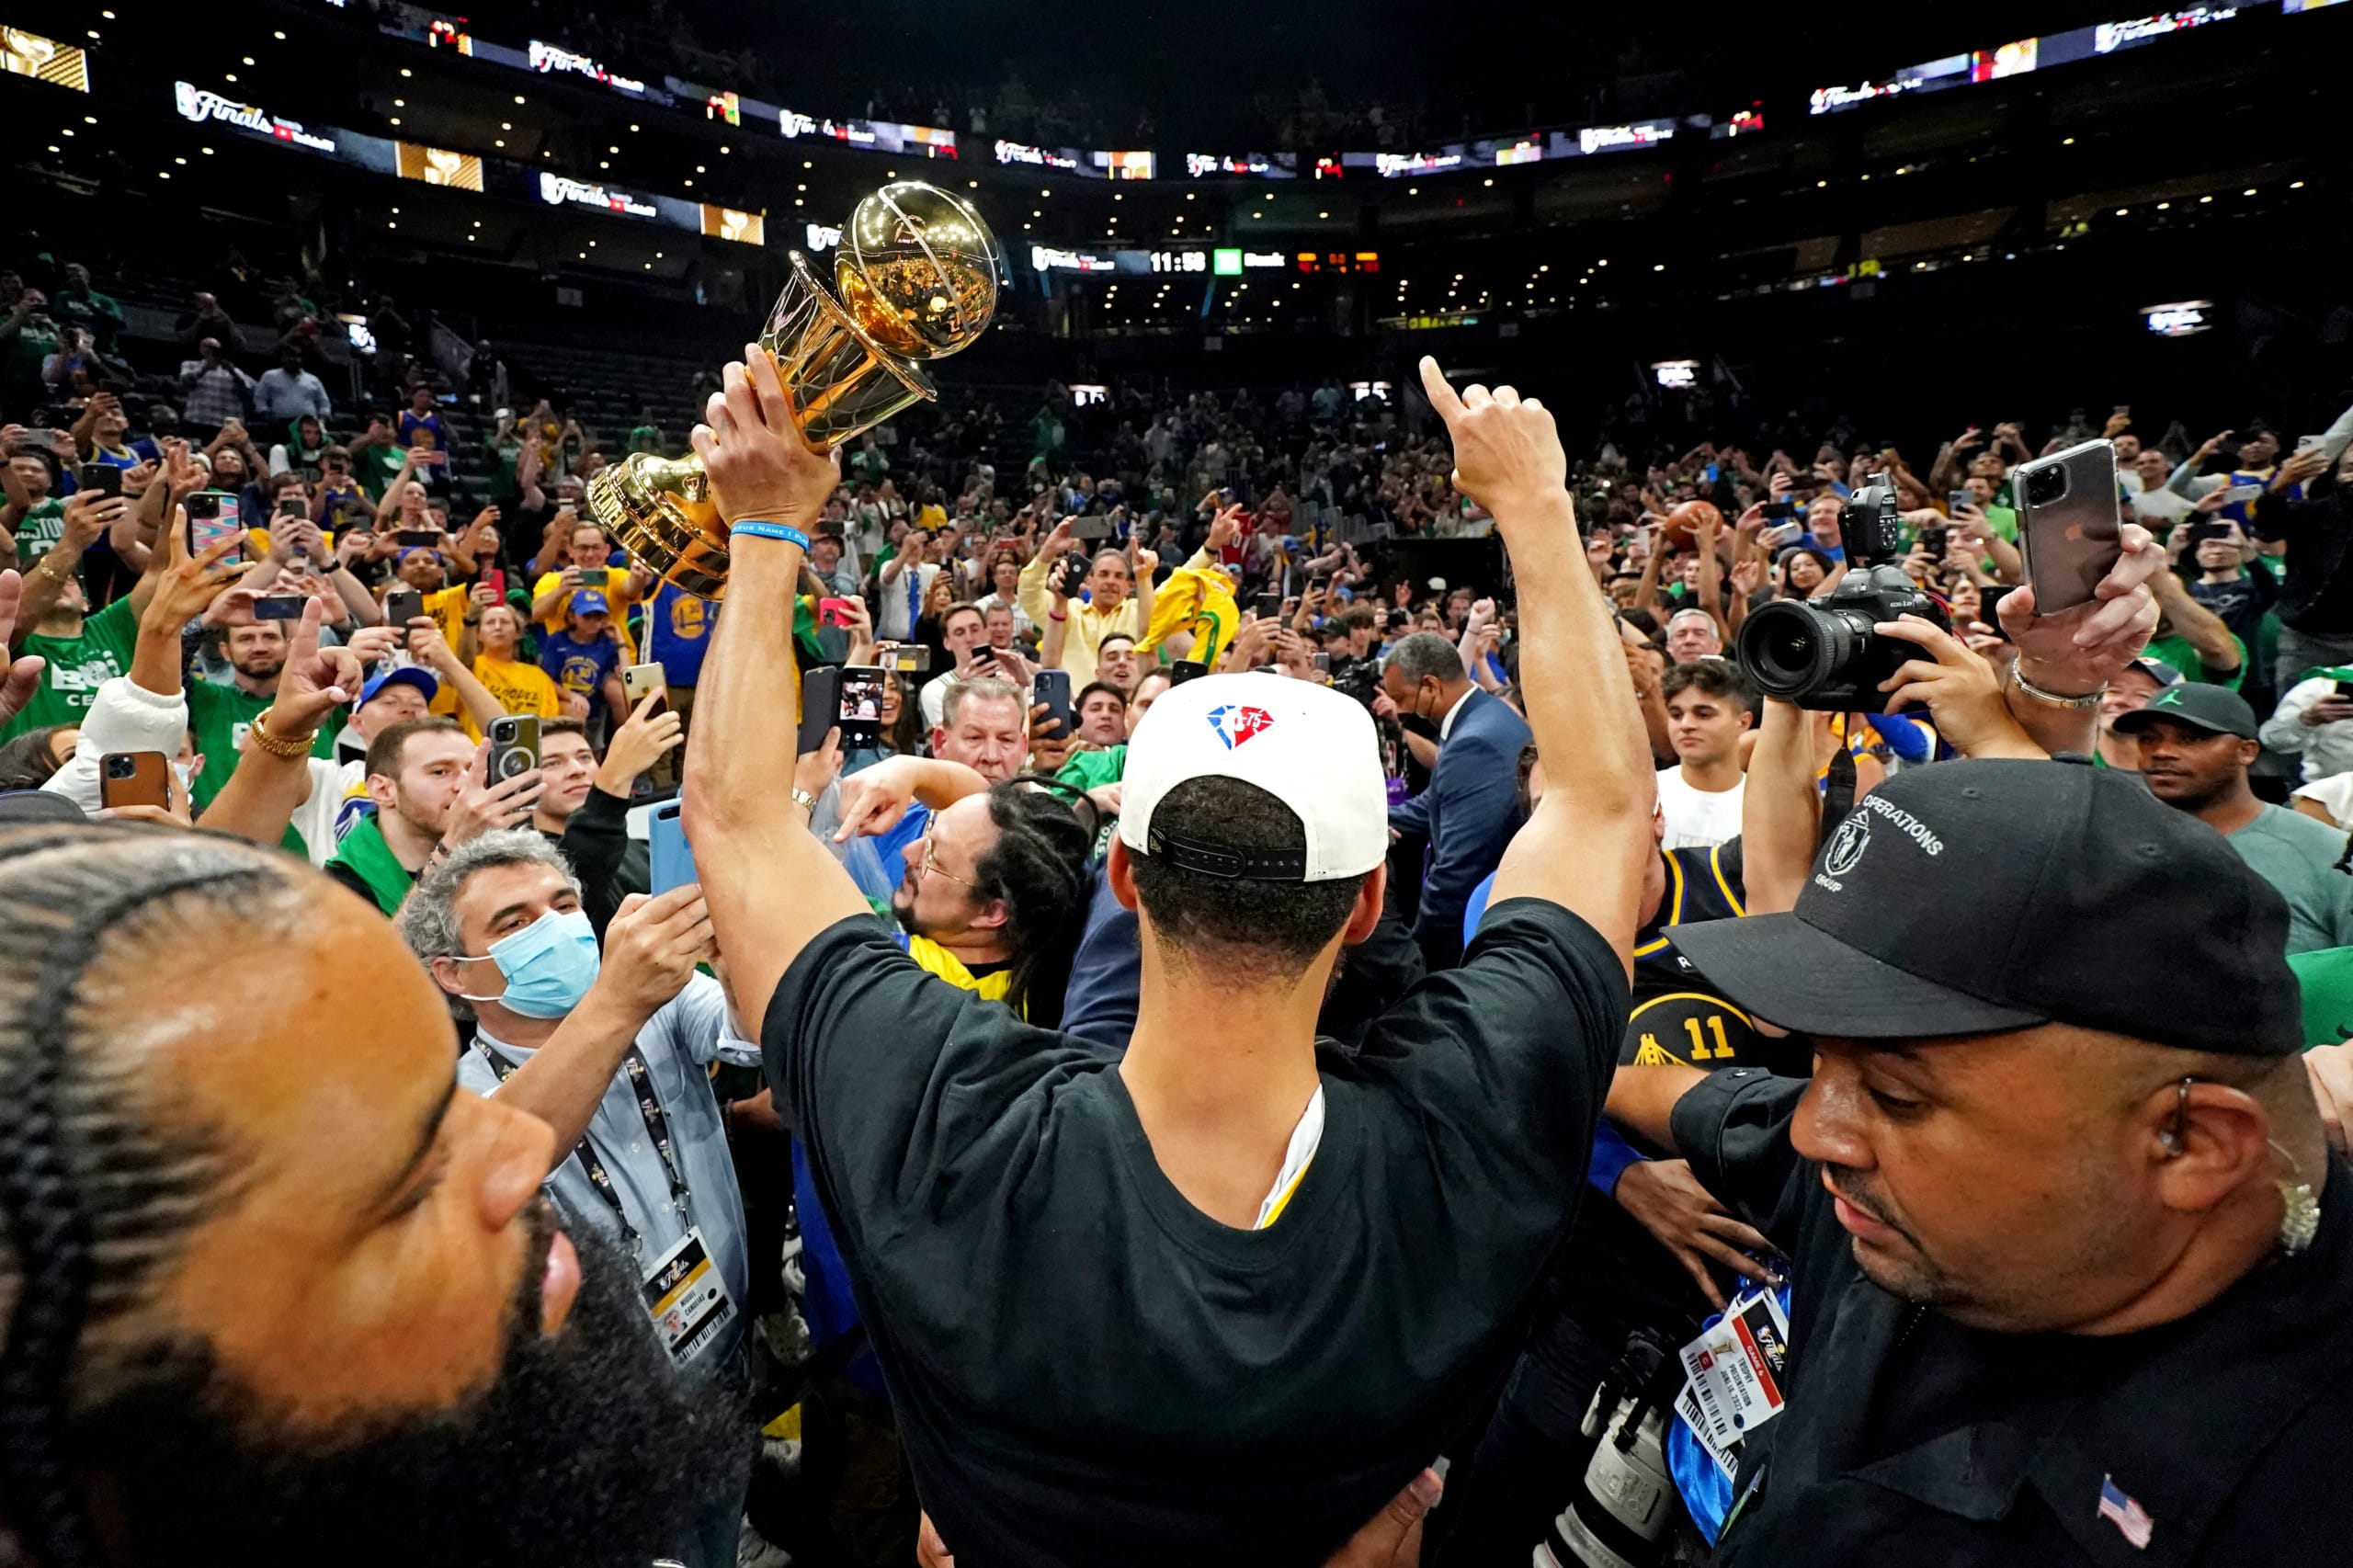 Steph Curry celebrates in front of fans after winning NBA final 